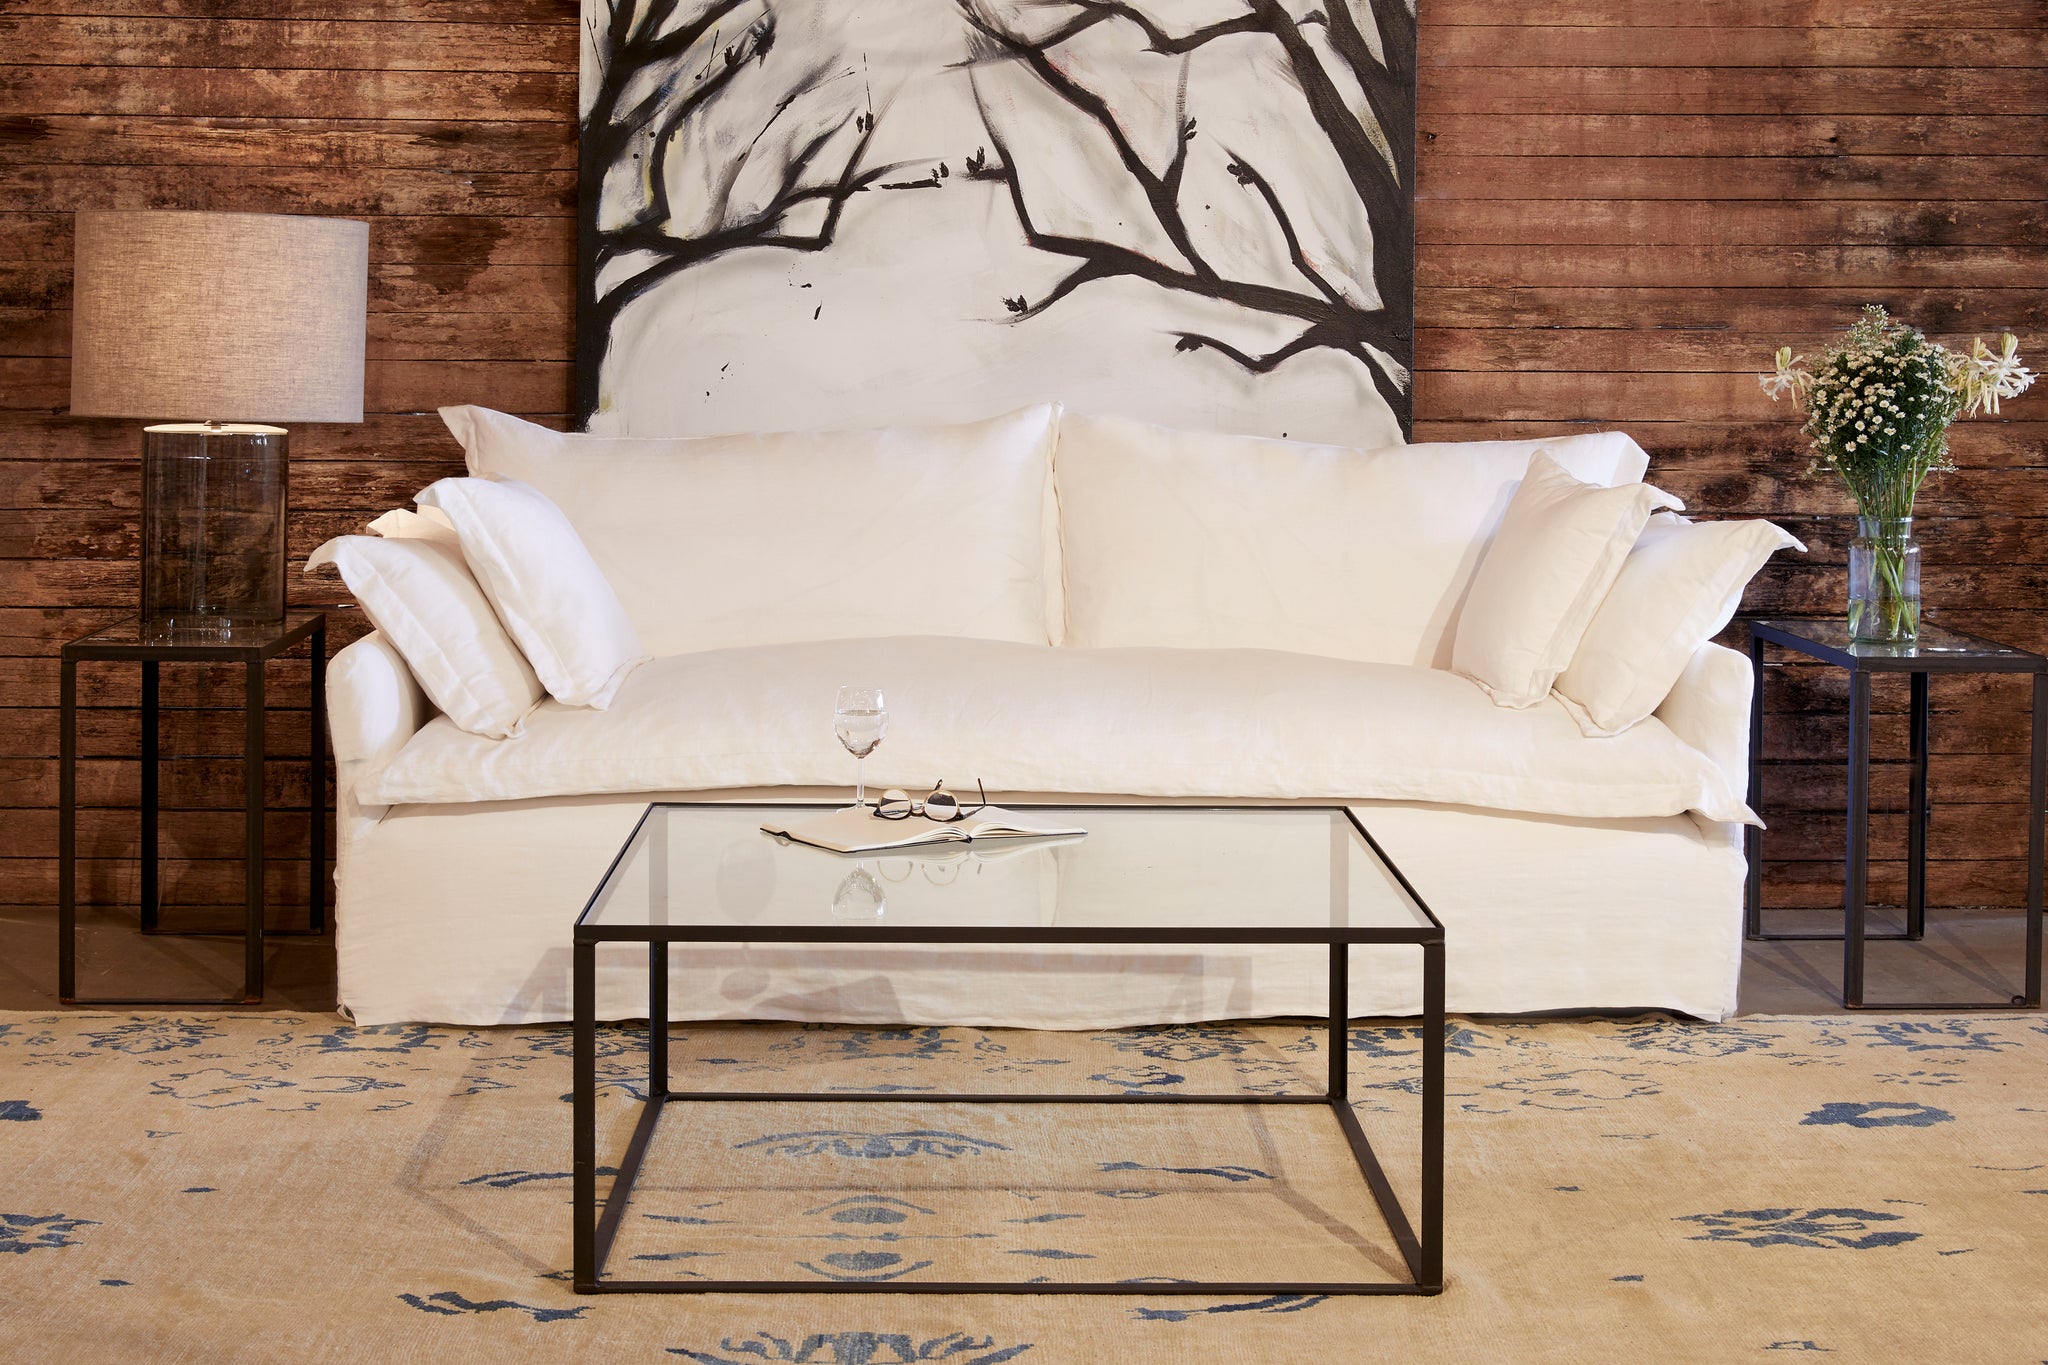  Paloma sofa slipcovered in front of a wood wall with a black and white painting of a tree. The Welders coffee table is in front, with a glass top, The Lena side tables have a Cylinder table lamp on the left and some white flowers on the right. Photographed in Otis White. 